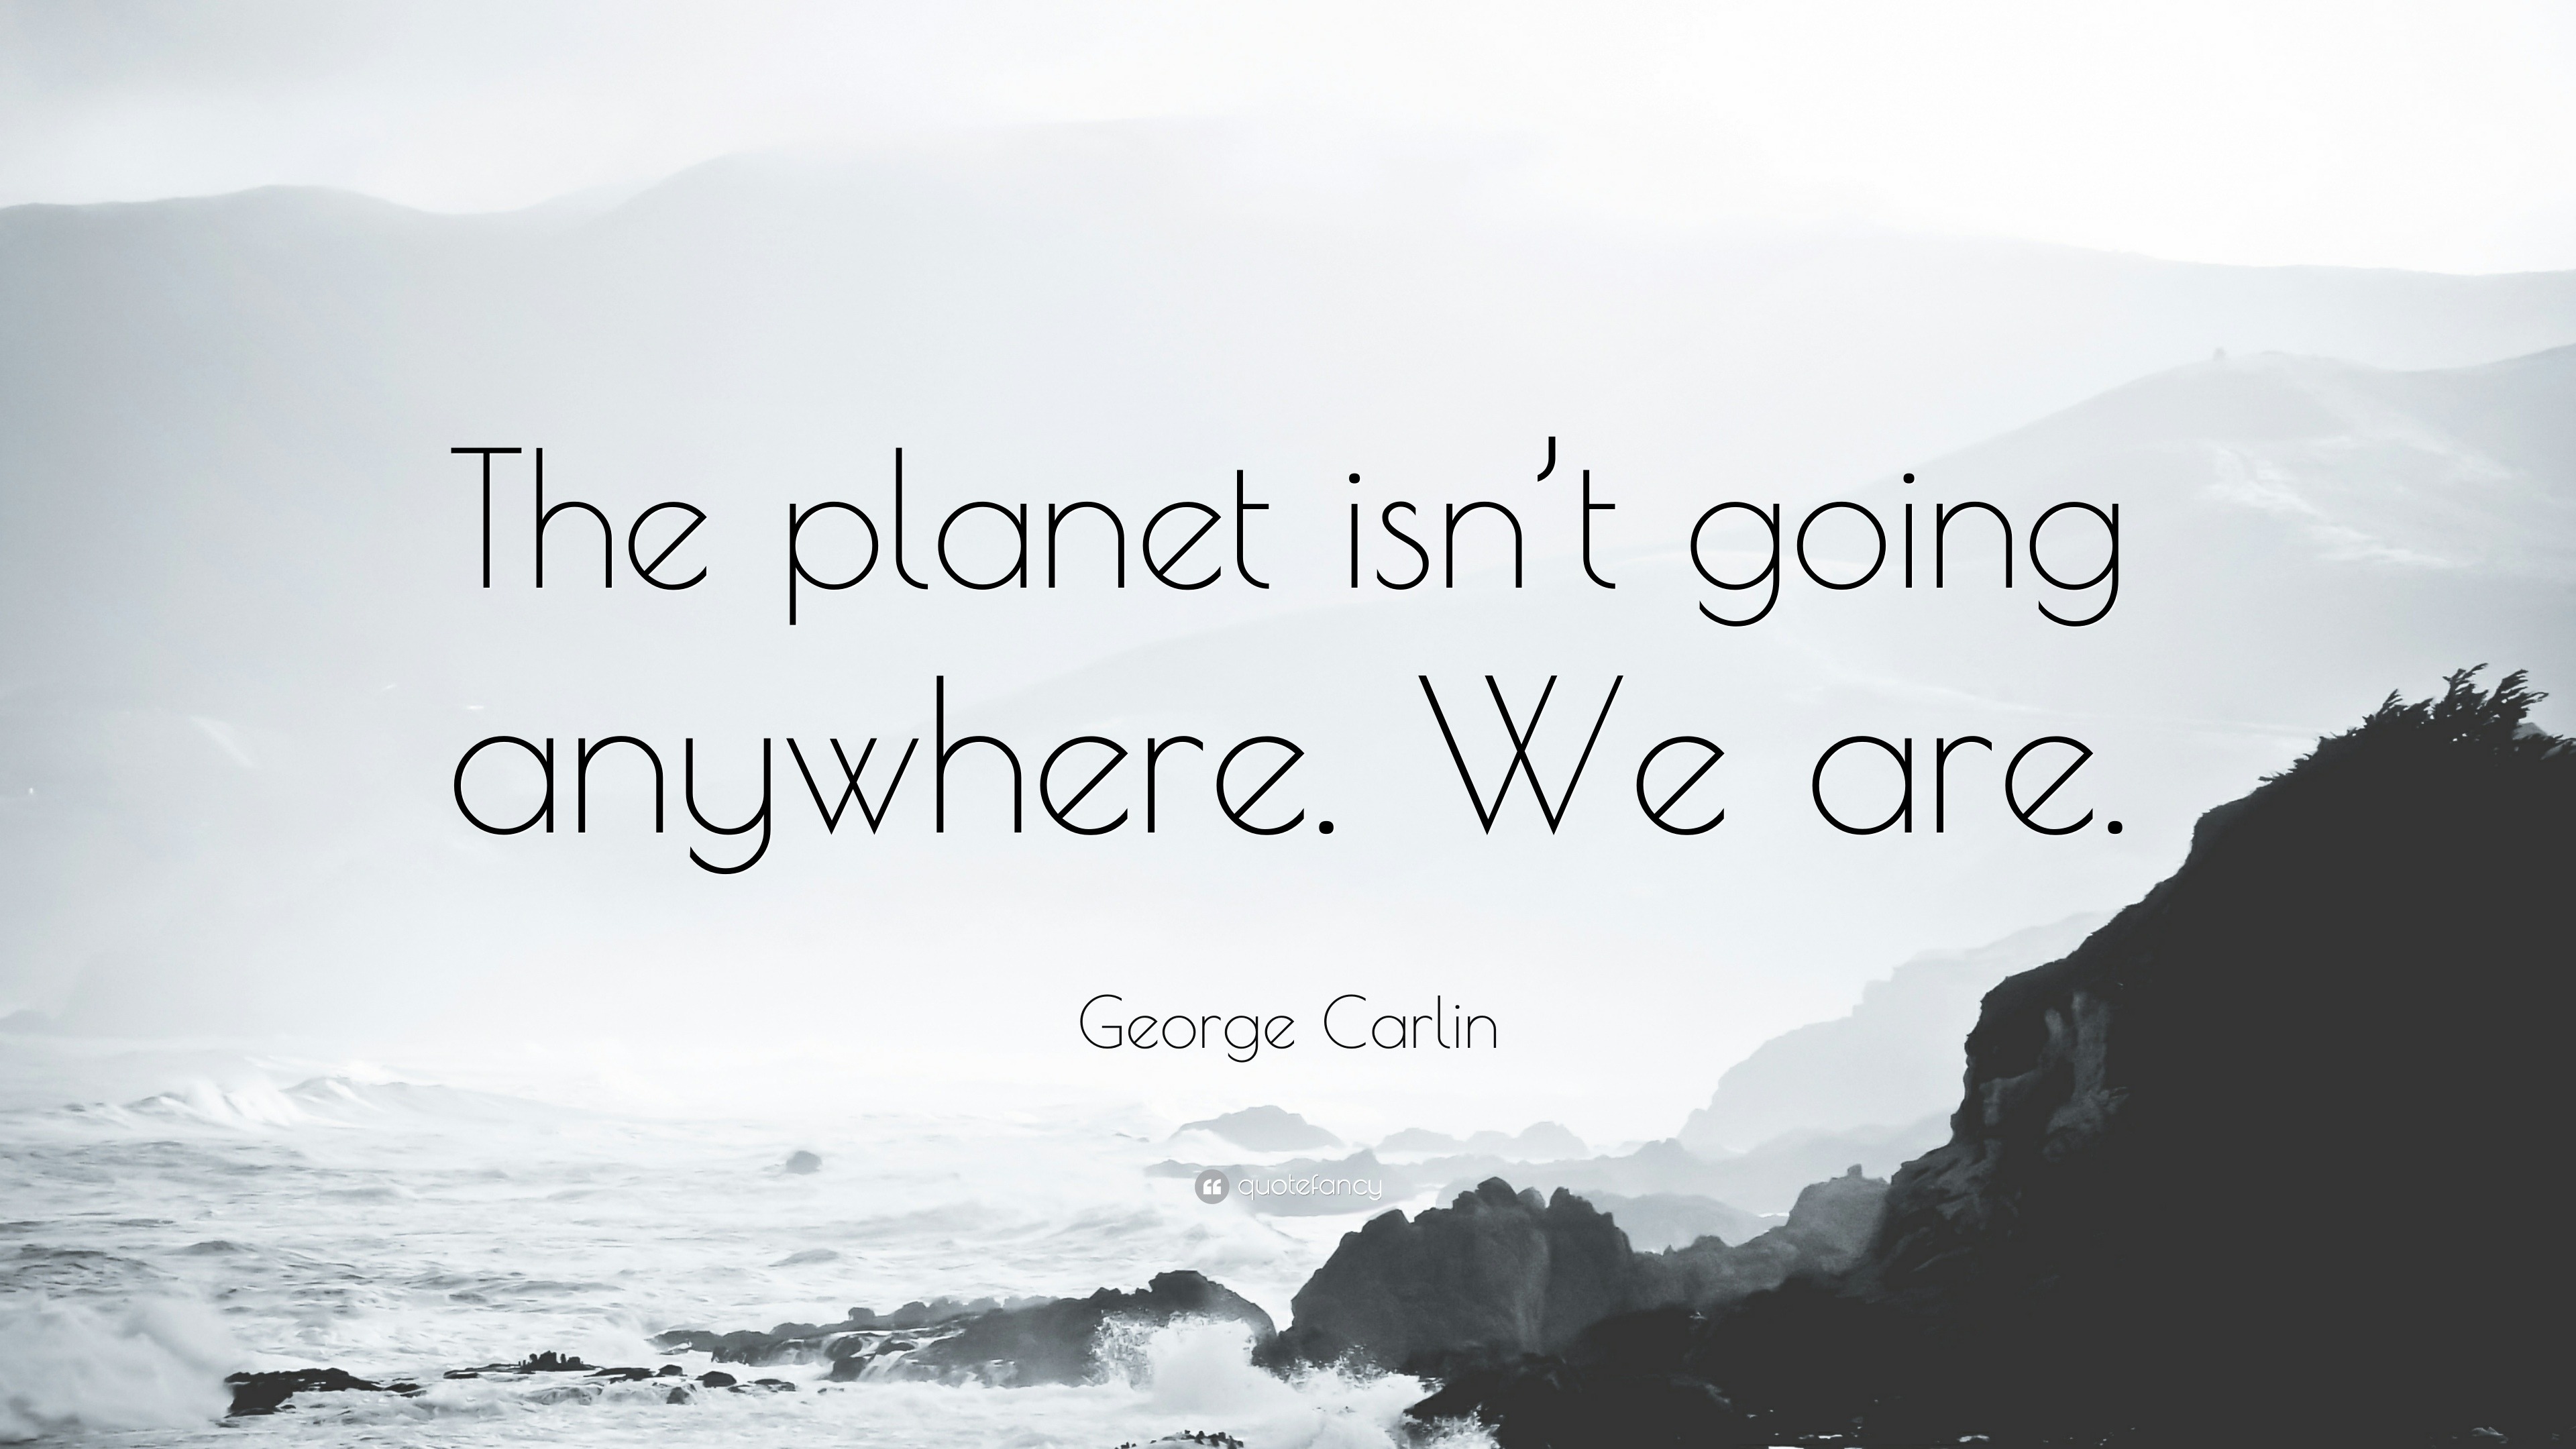 400600-George-Carlin-Quote-The-planet-isn-t-going-anywhere-We-are.jpg